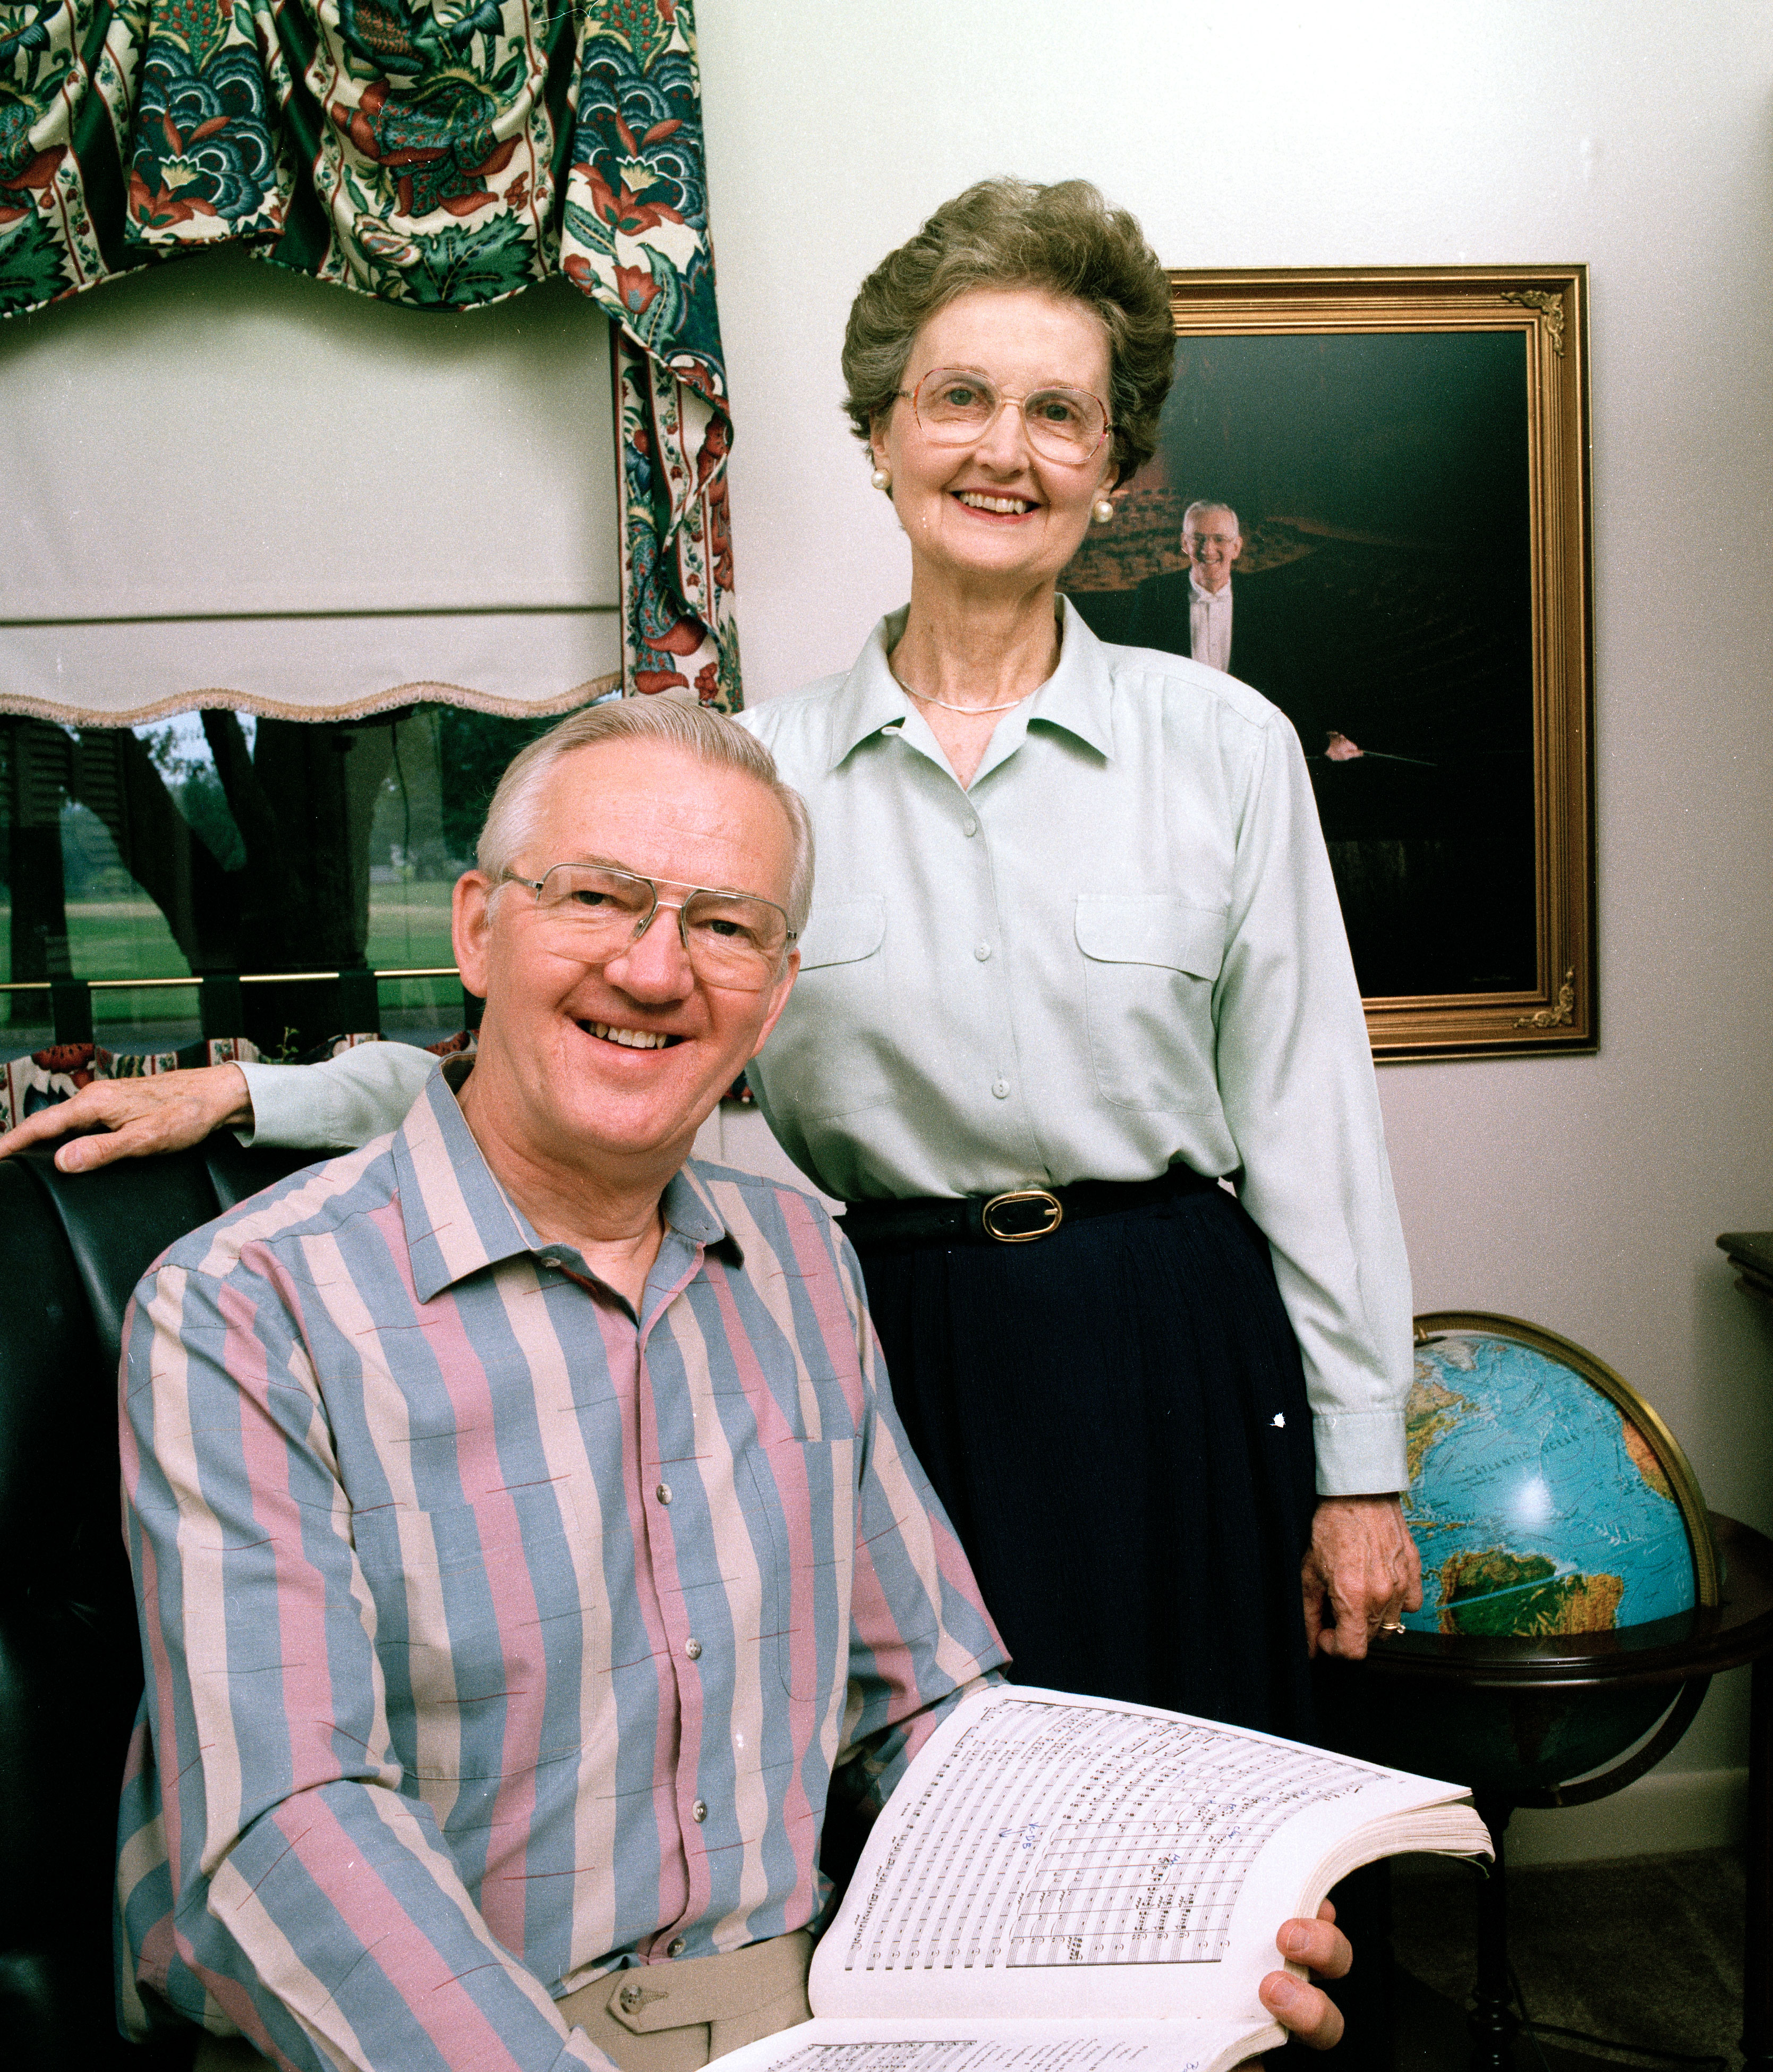 Dr. Gus and his wife Gwen, 1997